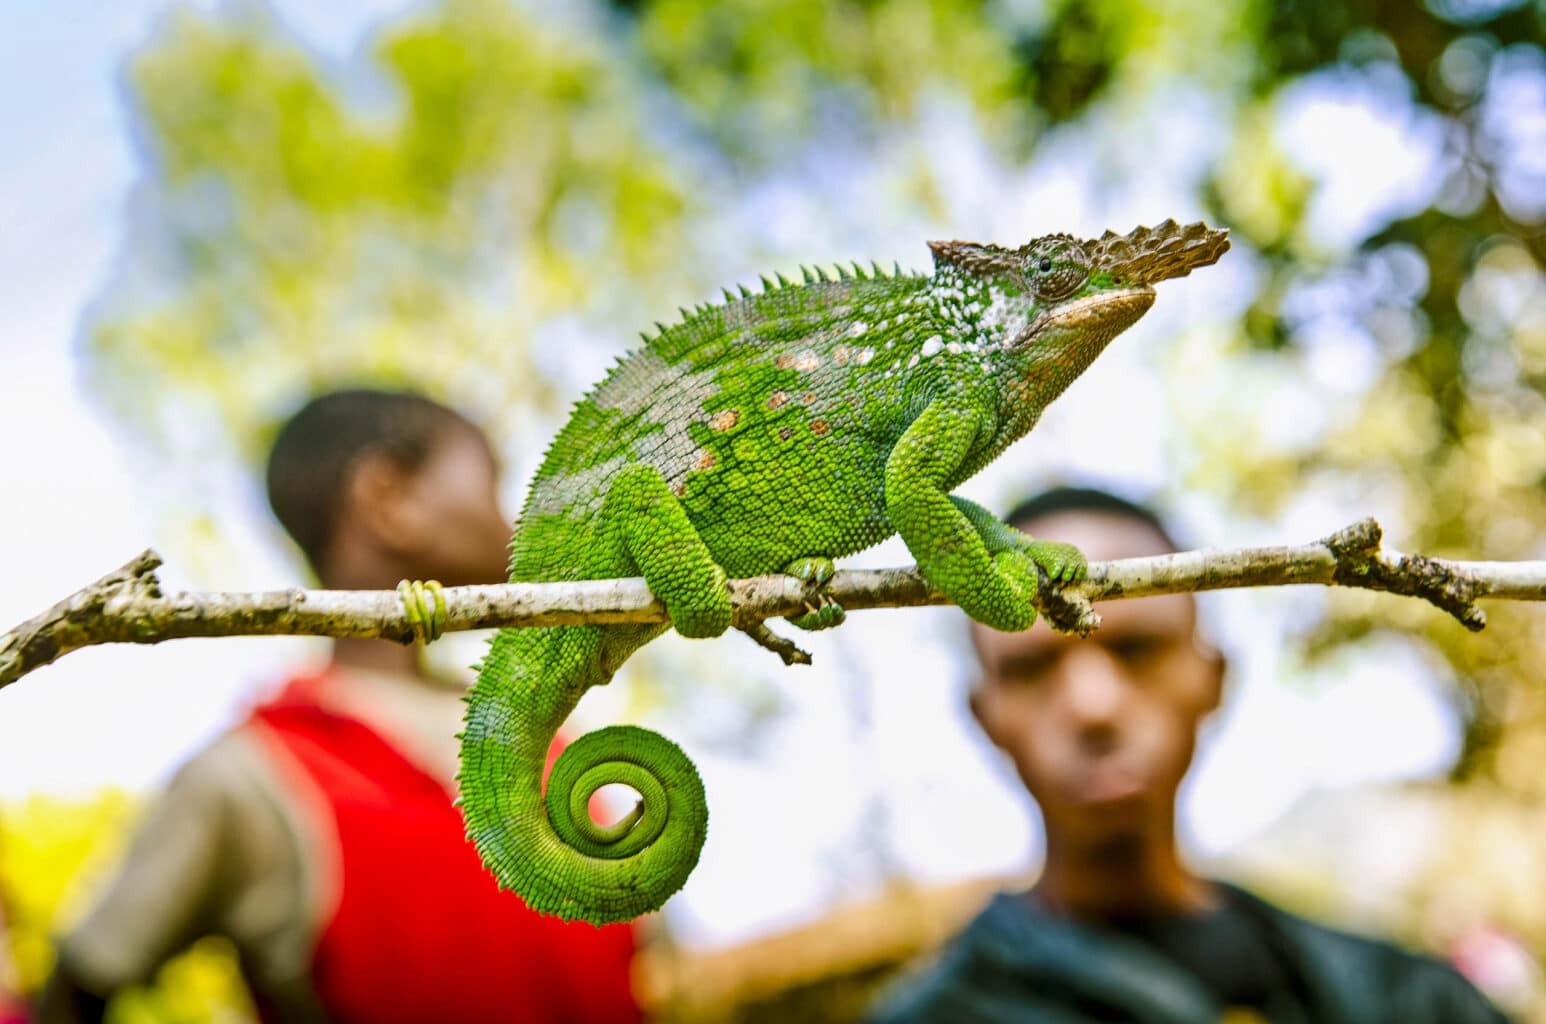 Green chameleon sits on branch in Madagascar with boys in background.